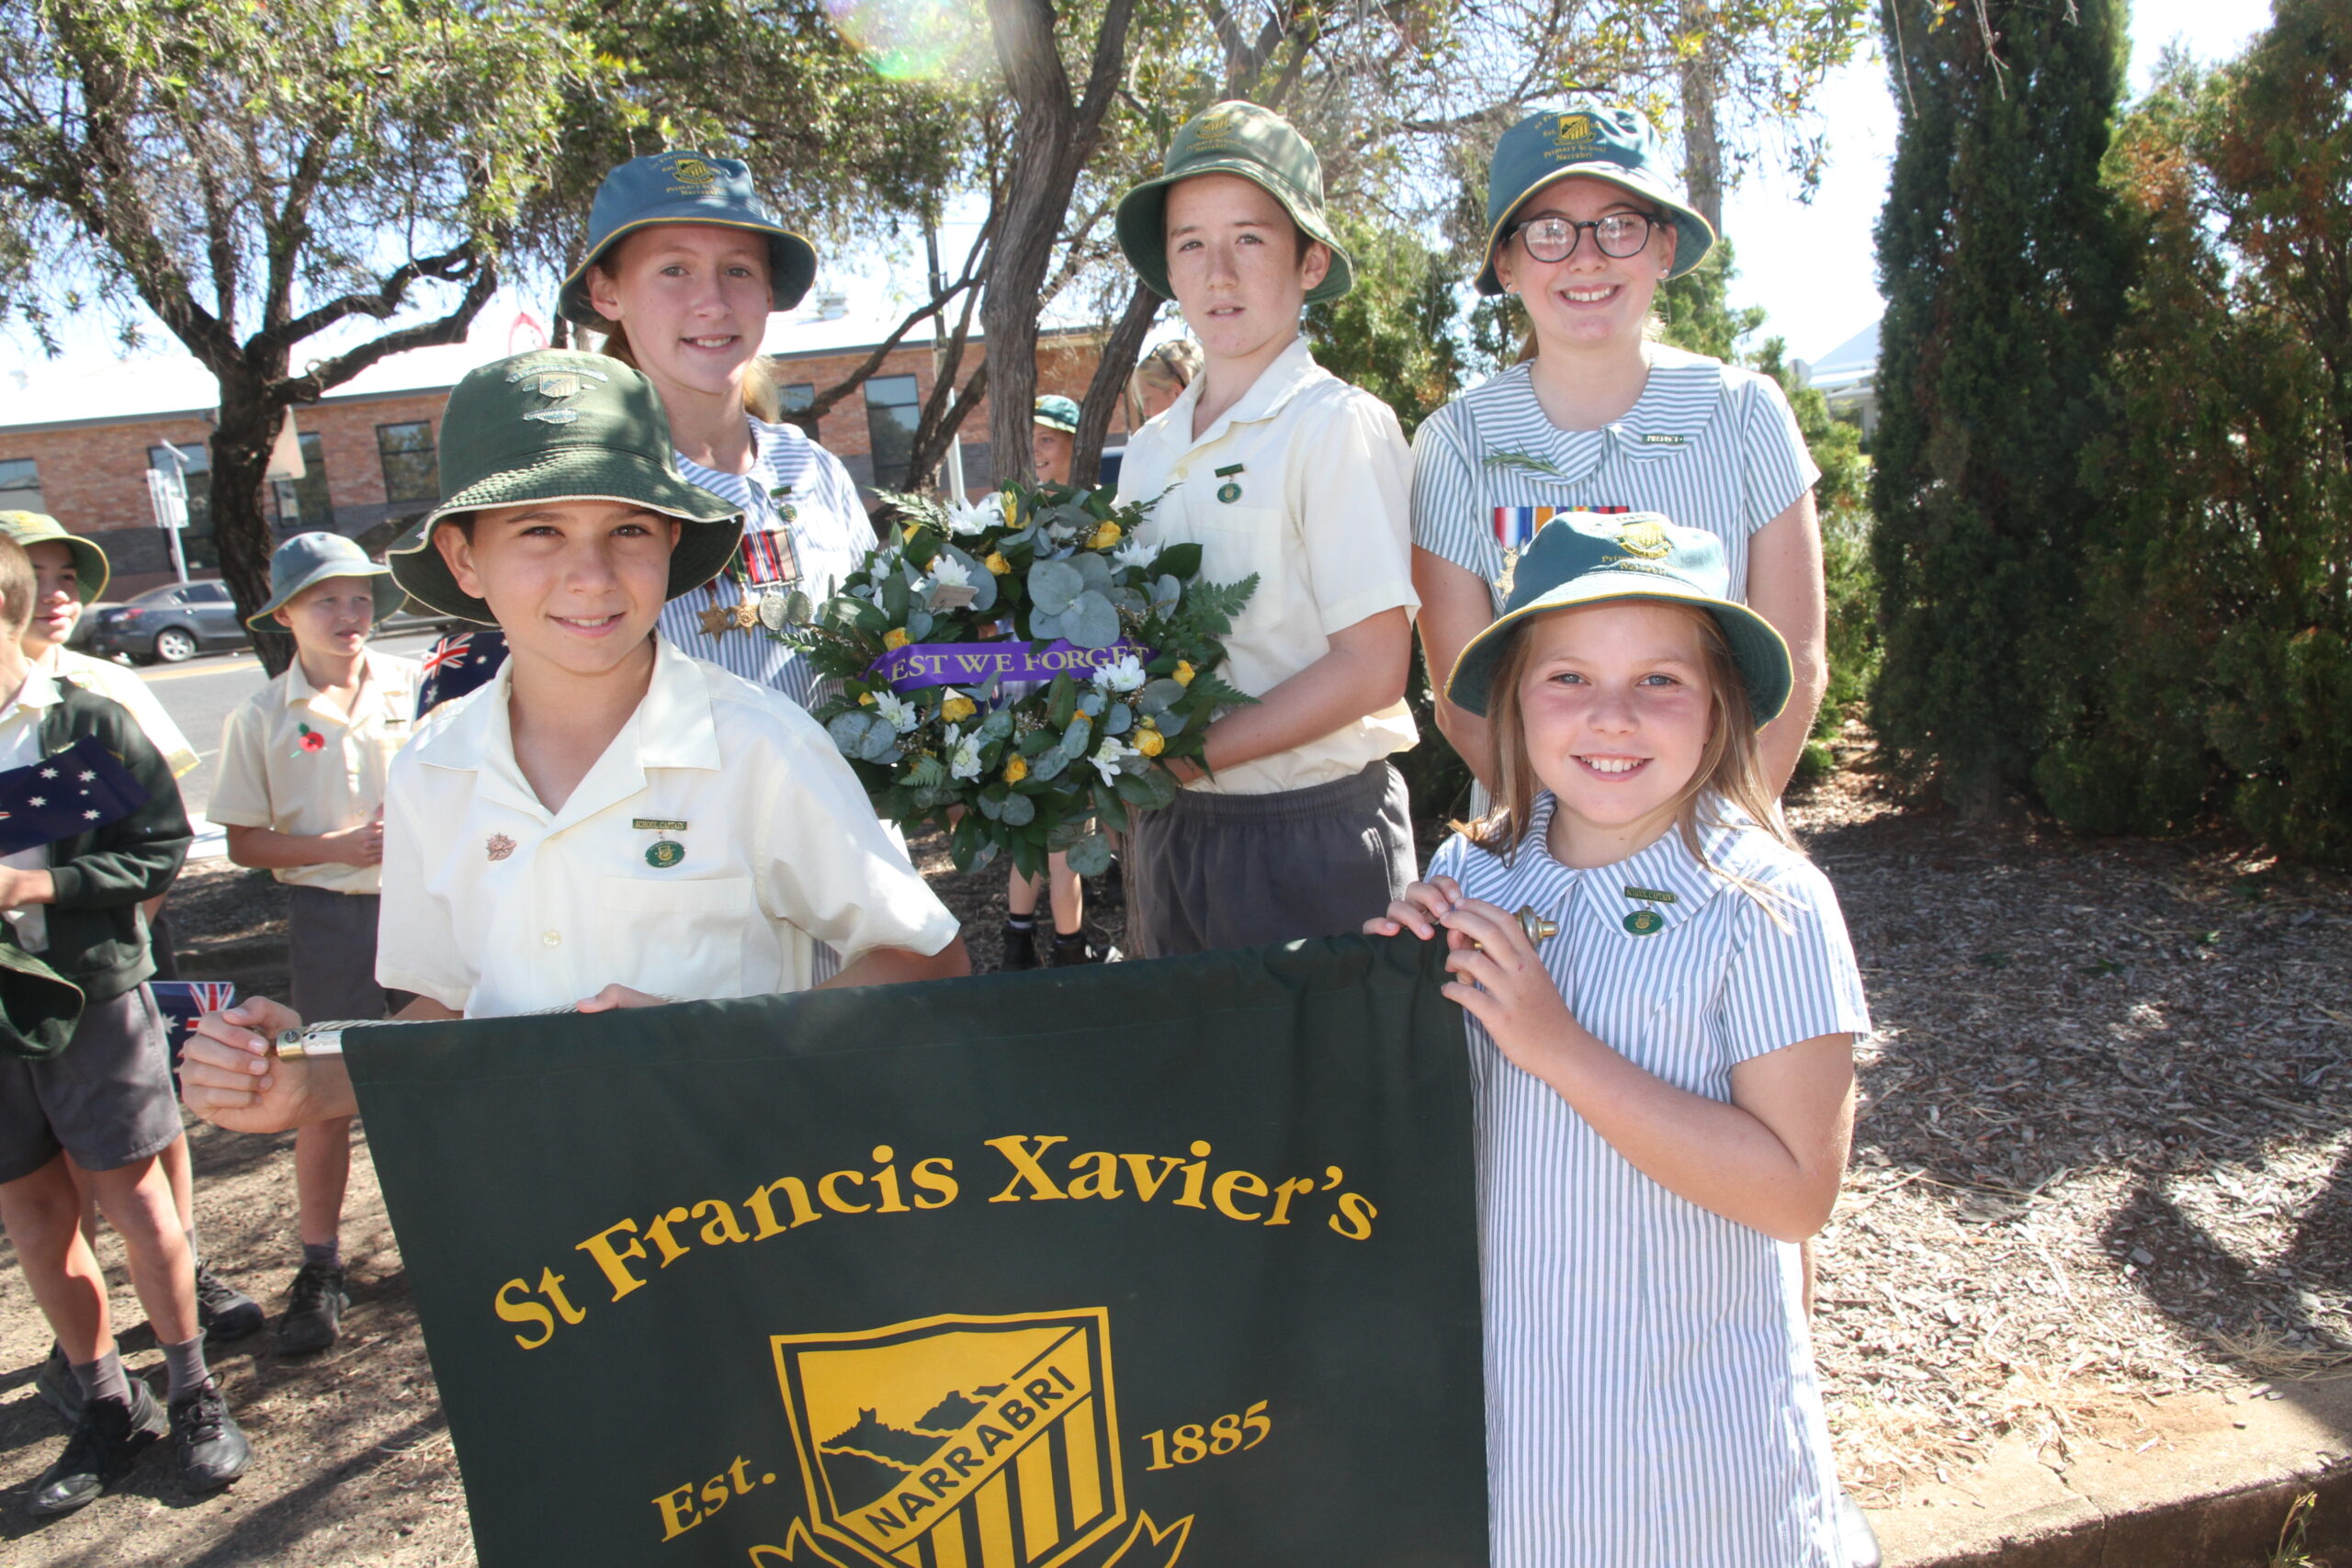 St Francis Xavier’s marchers, back, Aleira Sunderland, Gabe O’Connor, Tilly Gleeson, front, school captains Patrick Campbell and Charlie Tout.